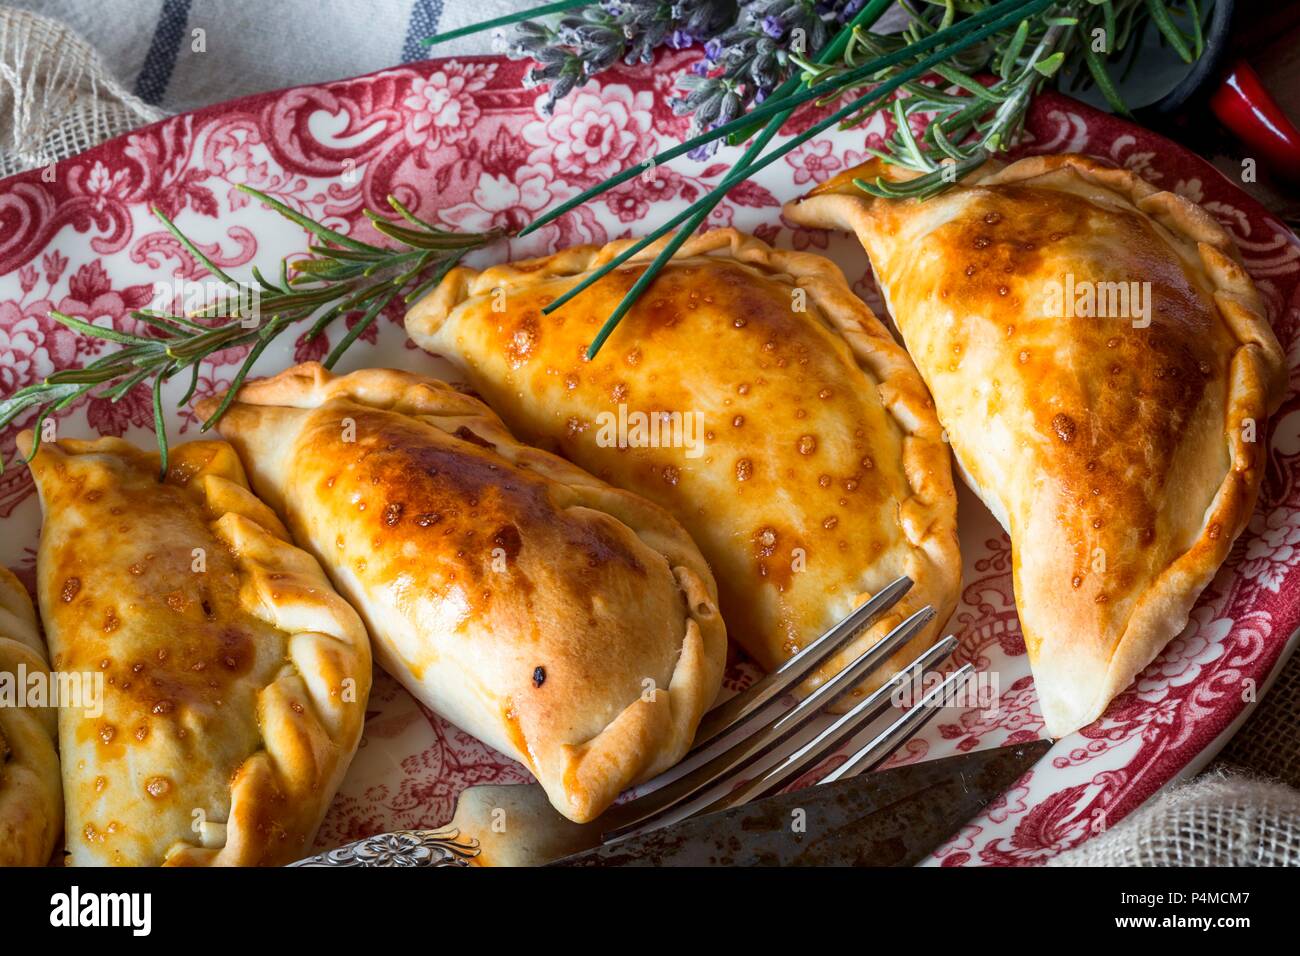 A plate of Spanish pasties filled with meat and tuna Stock Photo